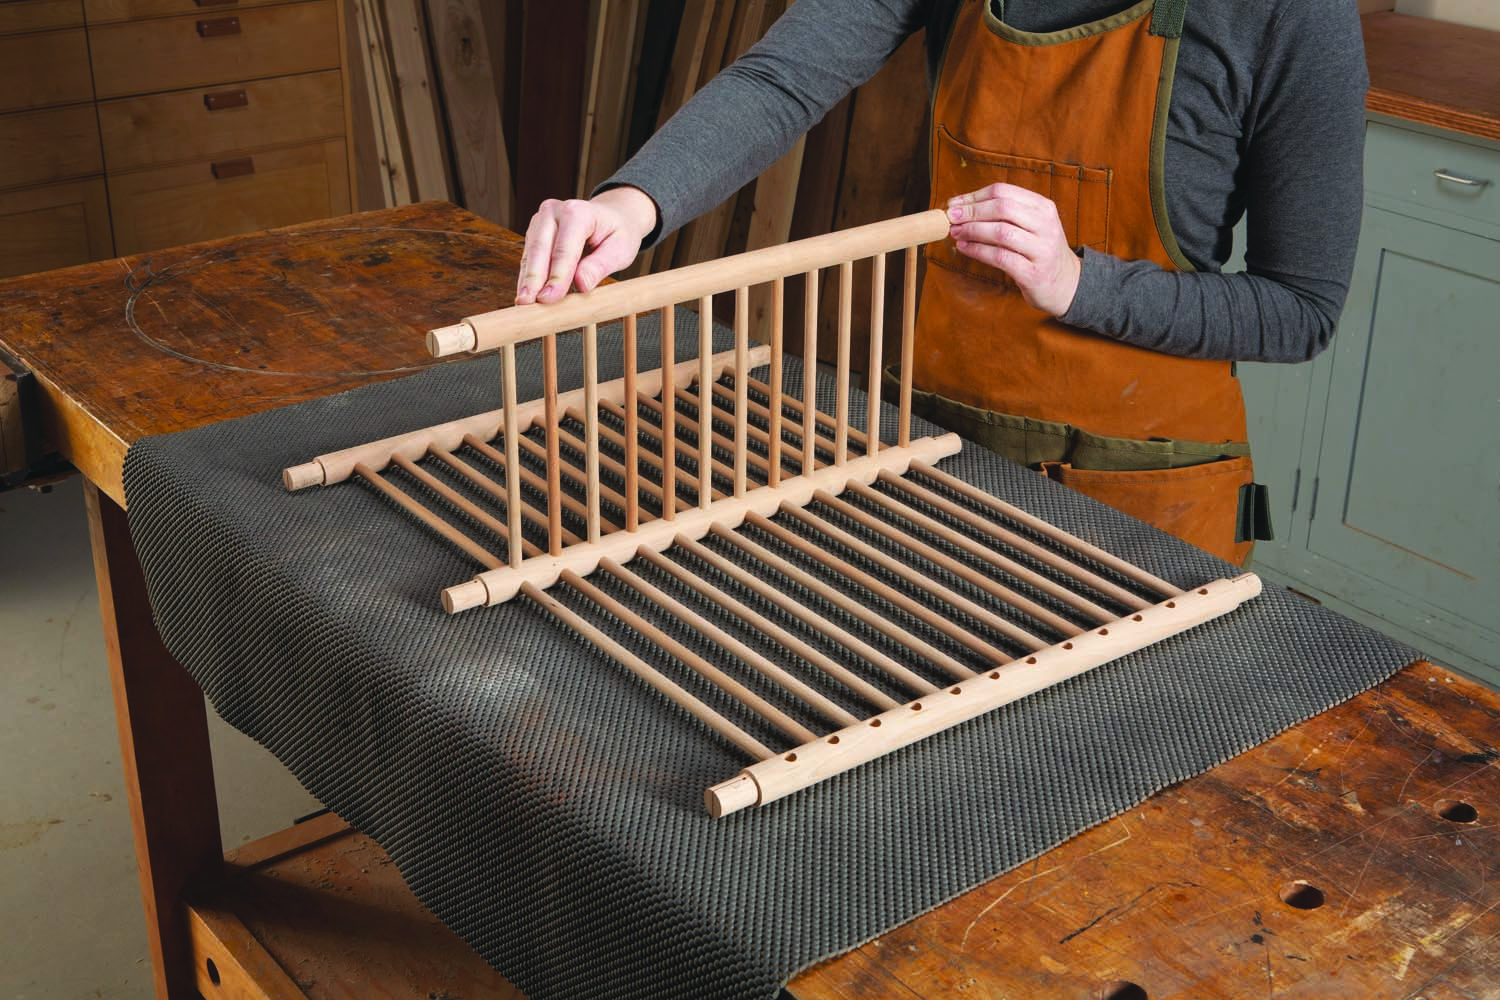 Modern Plate Rack Project Download – Popular Woodworking